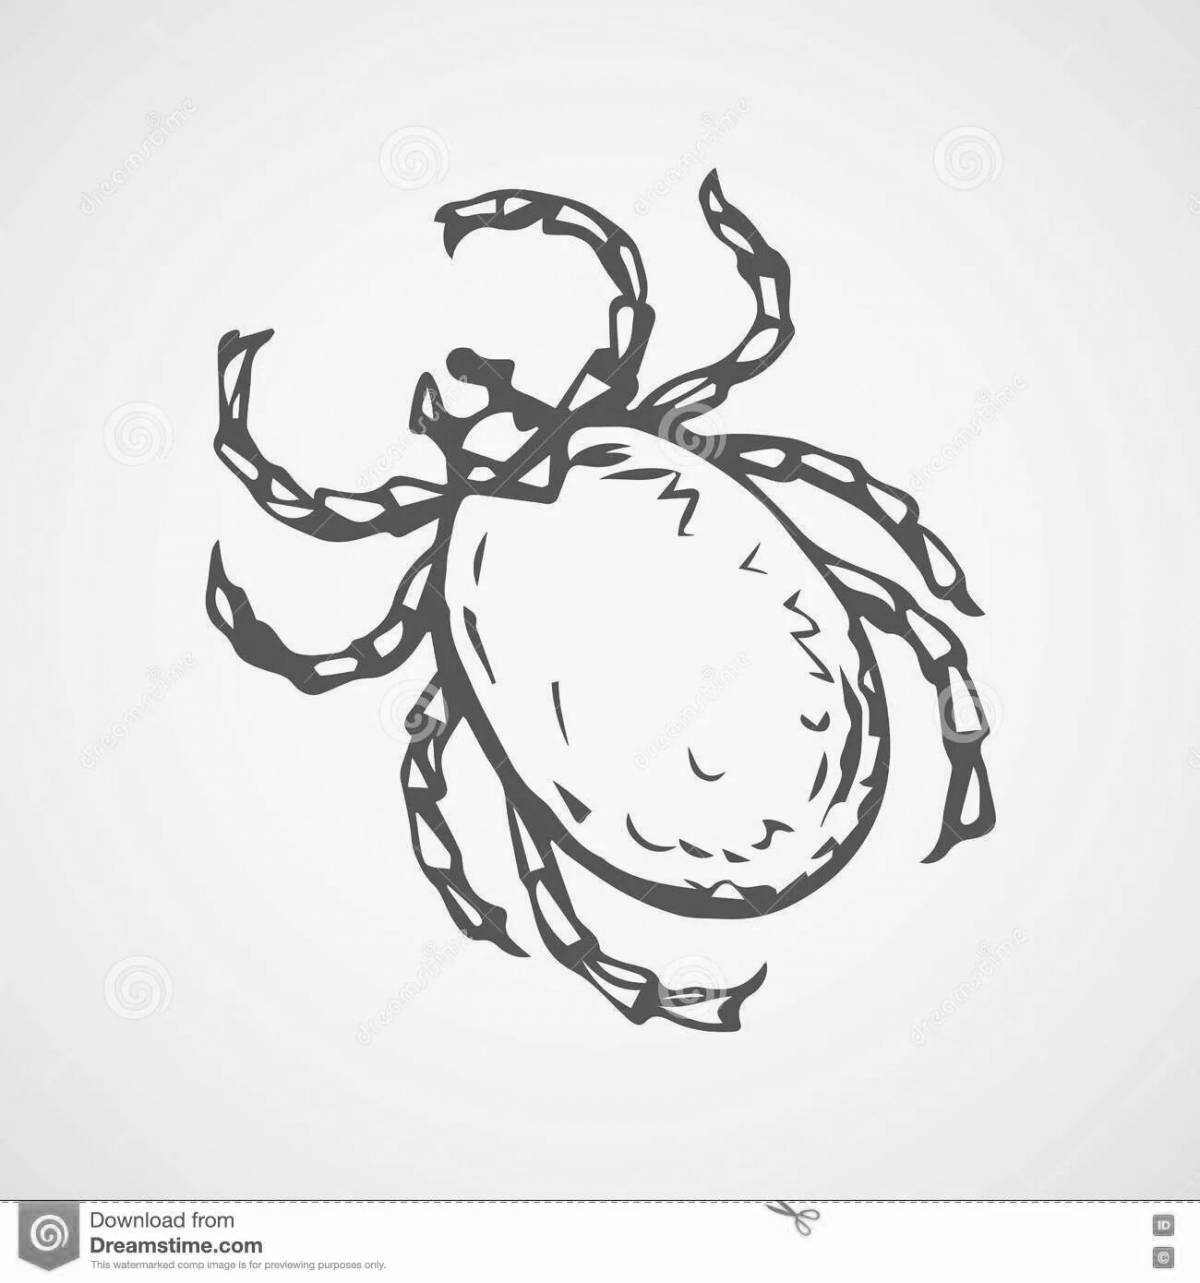 Tick coloring page for kids